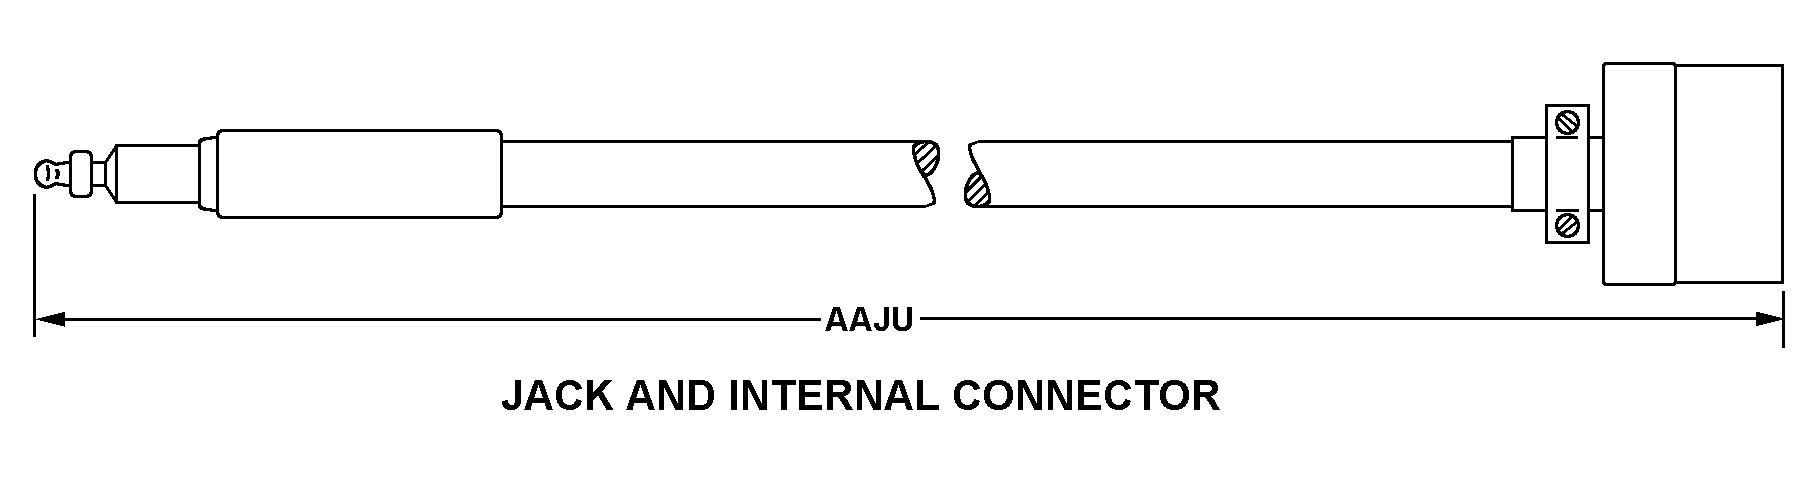 JACK AND INTERNAL CONNECTOR style nsn 5995-01-591-7456